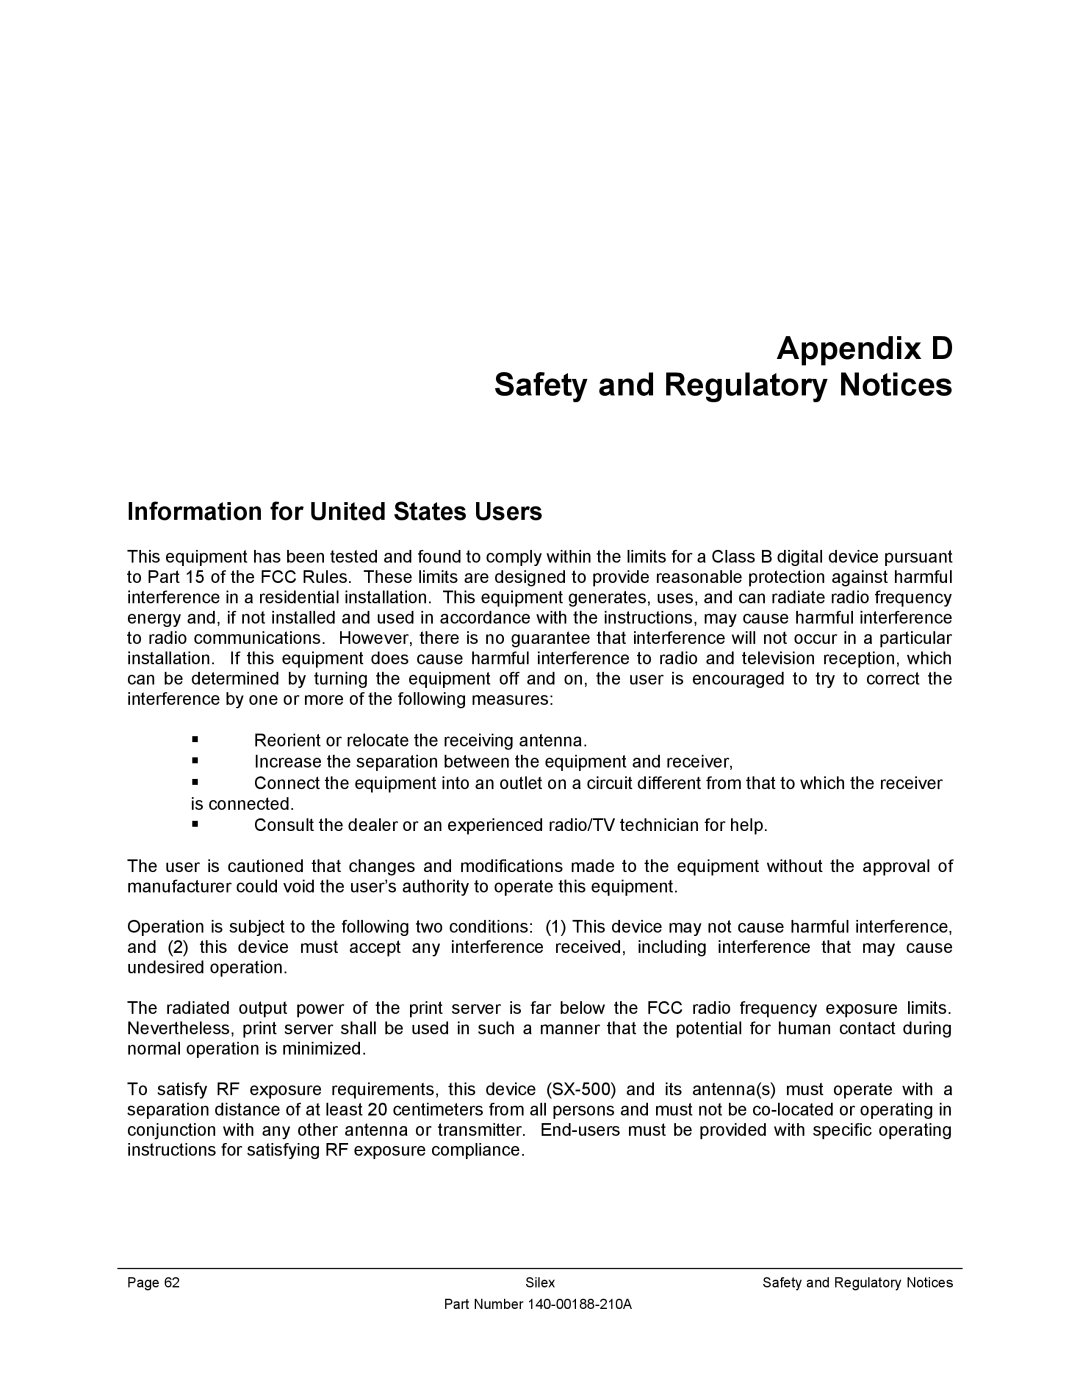 Silex technology SX-500-1402 manual Appendix D Safety and Regulatory Notices, Information for United States Users 